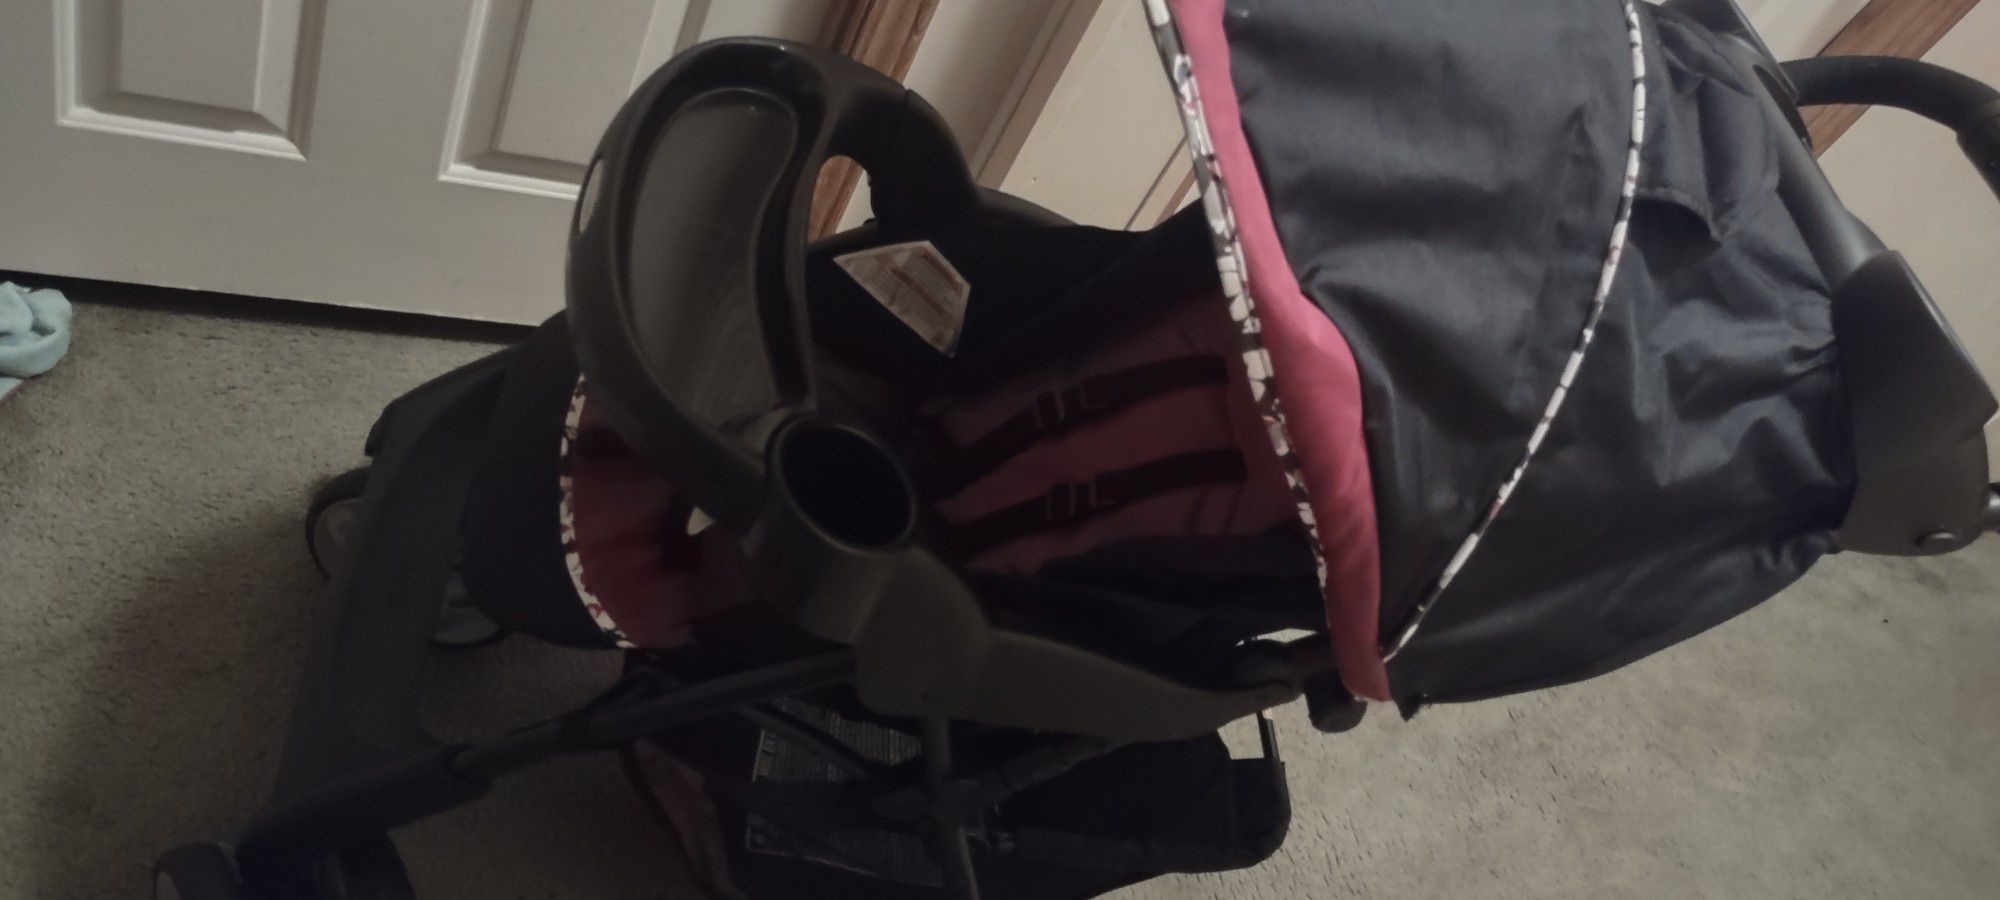 Carseat Stroller Combo 